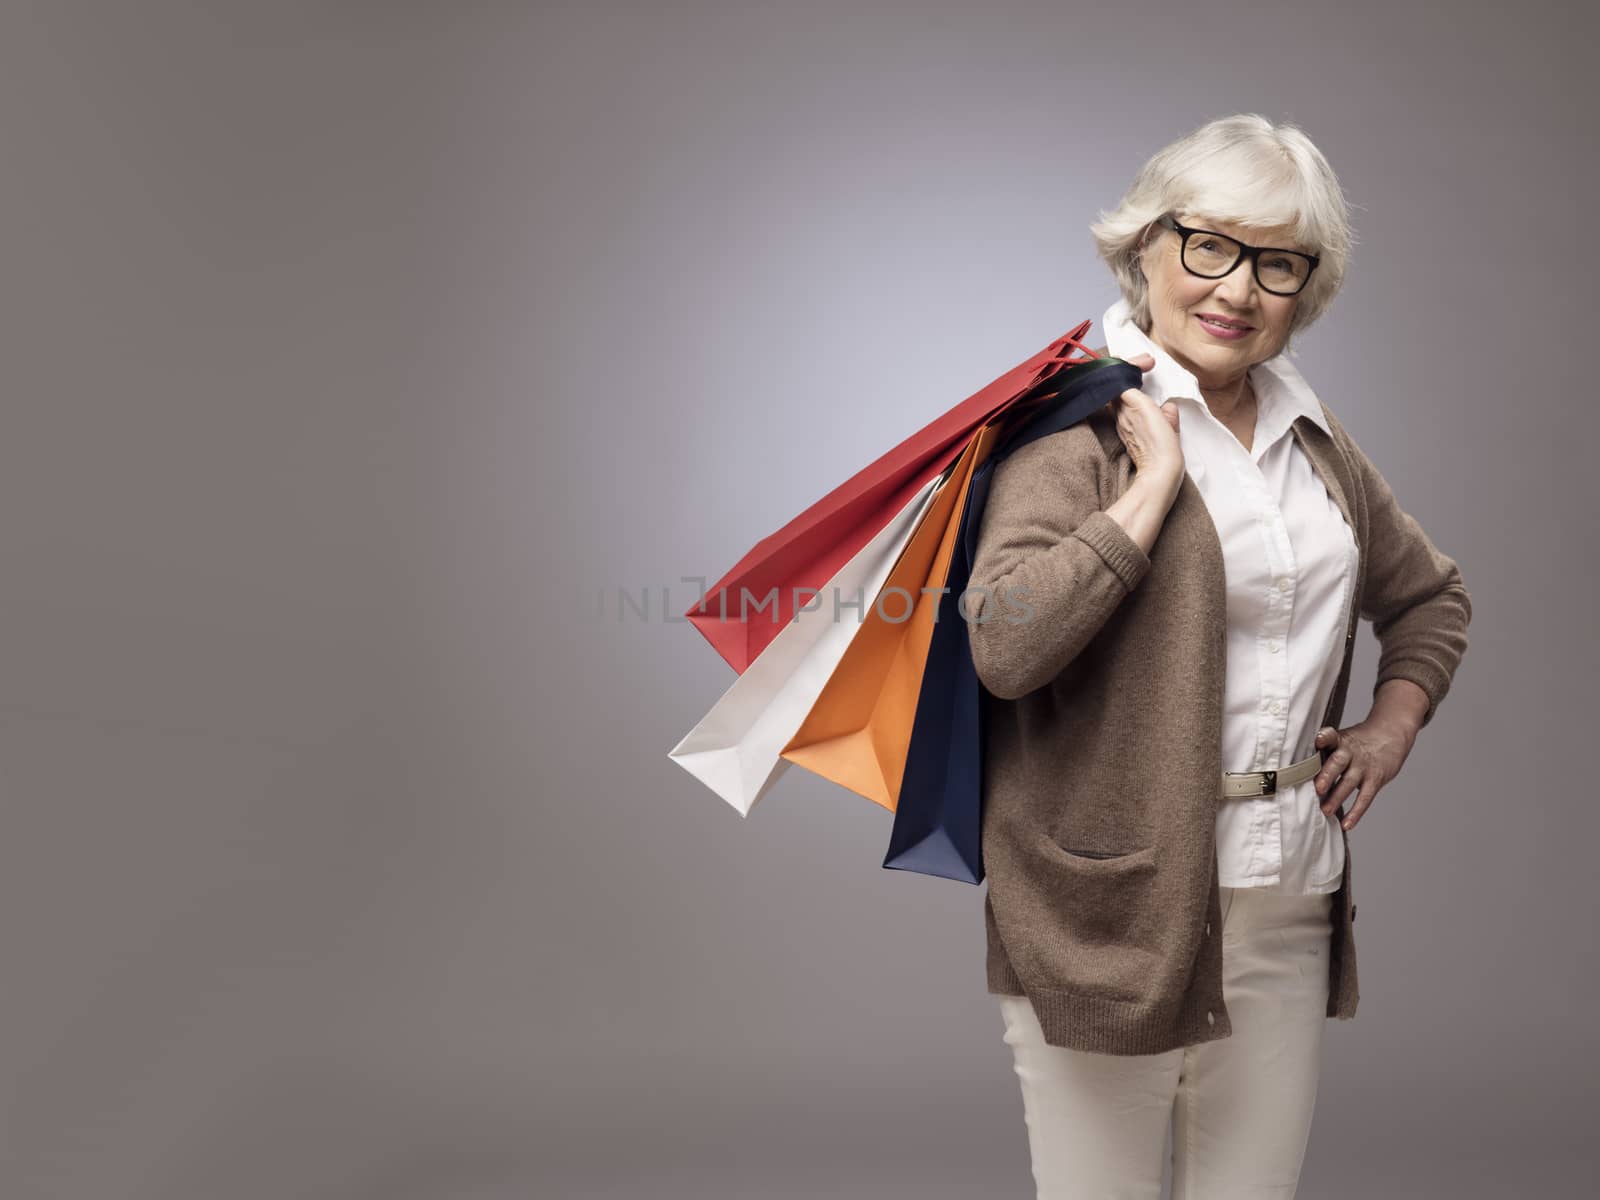 Studio portrait of happy senior woman with shopping bags